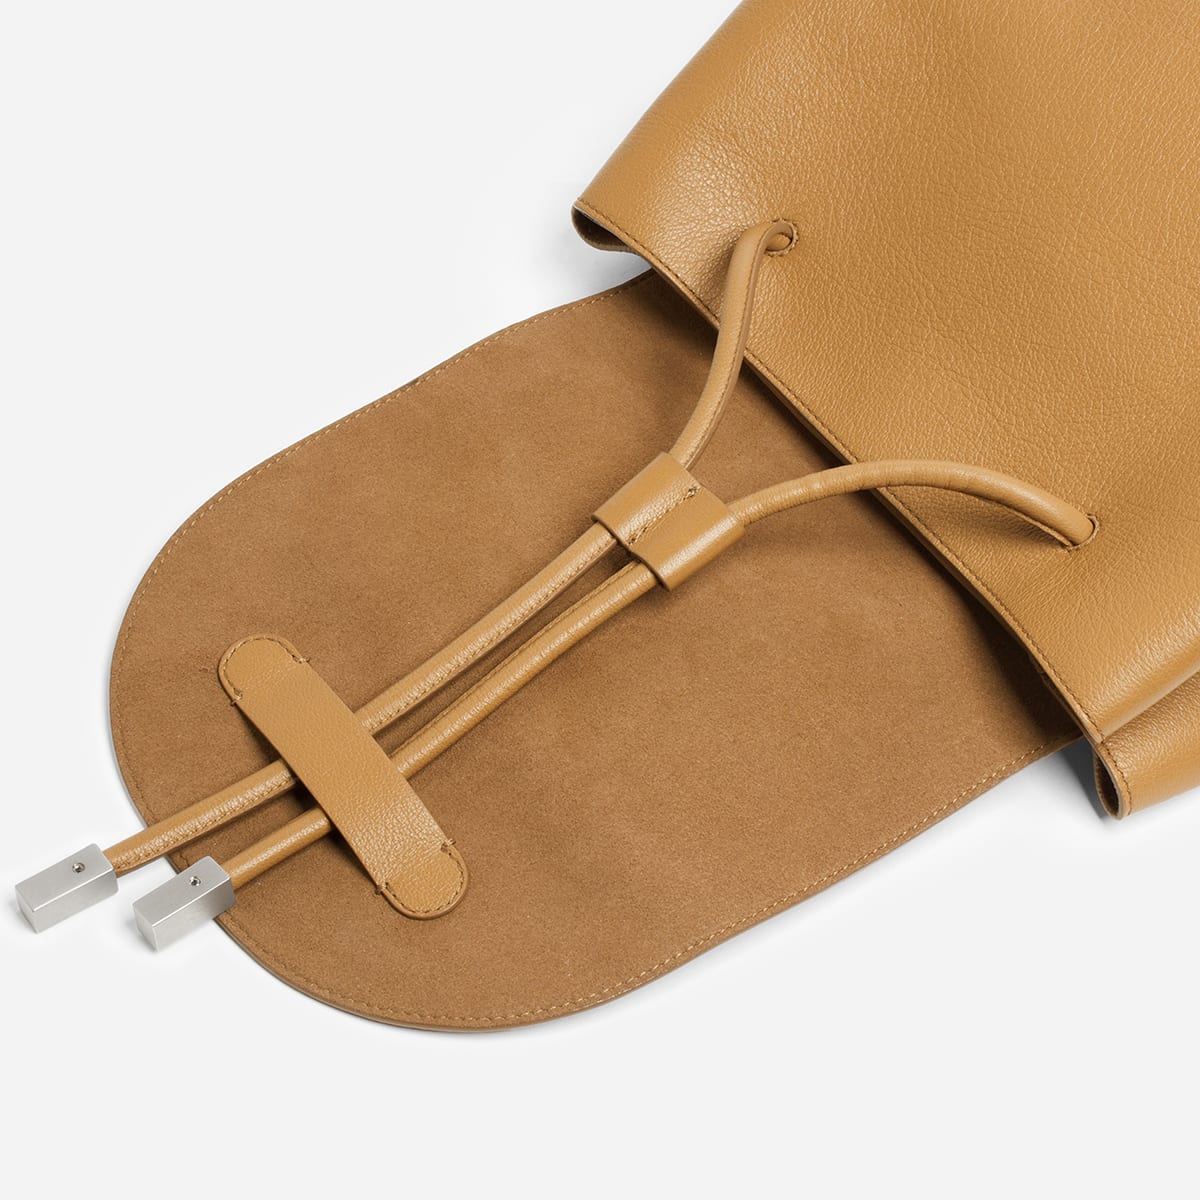 Everlane's Petra bag, the leather tote that launched with a 7,000